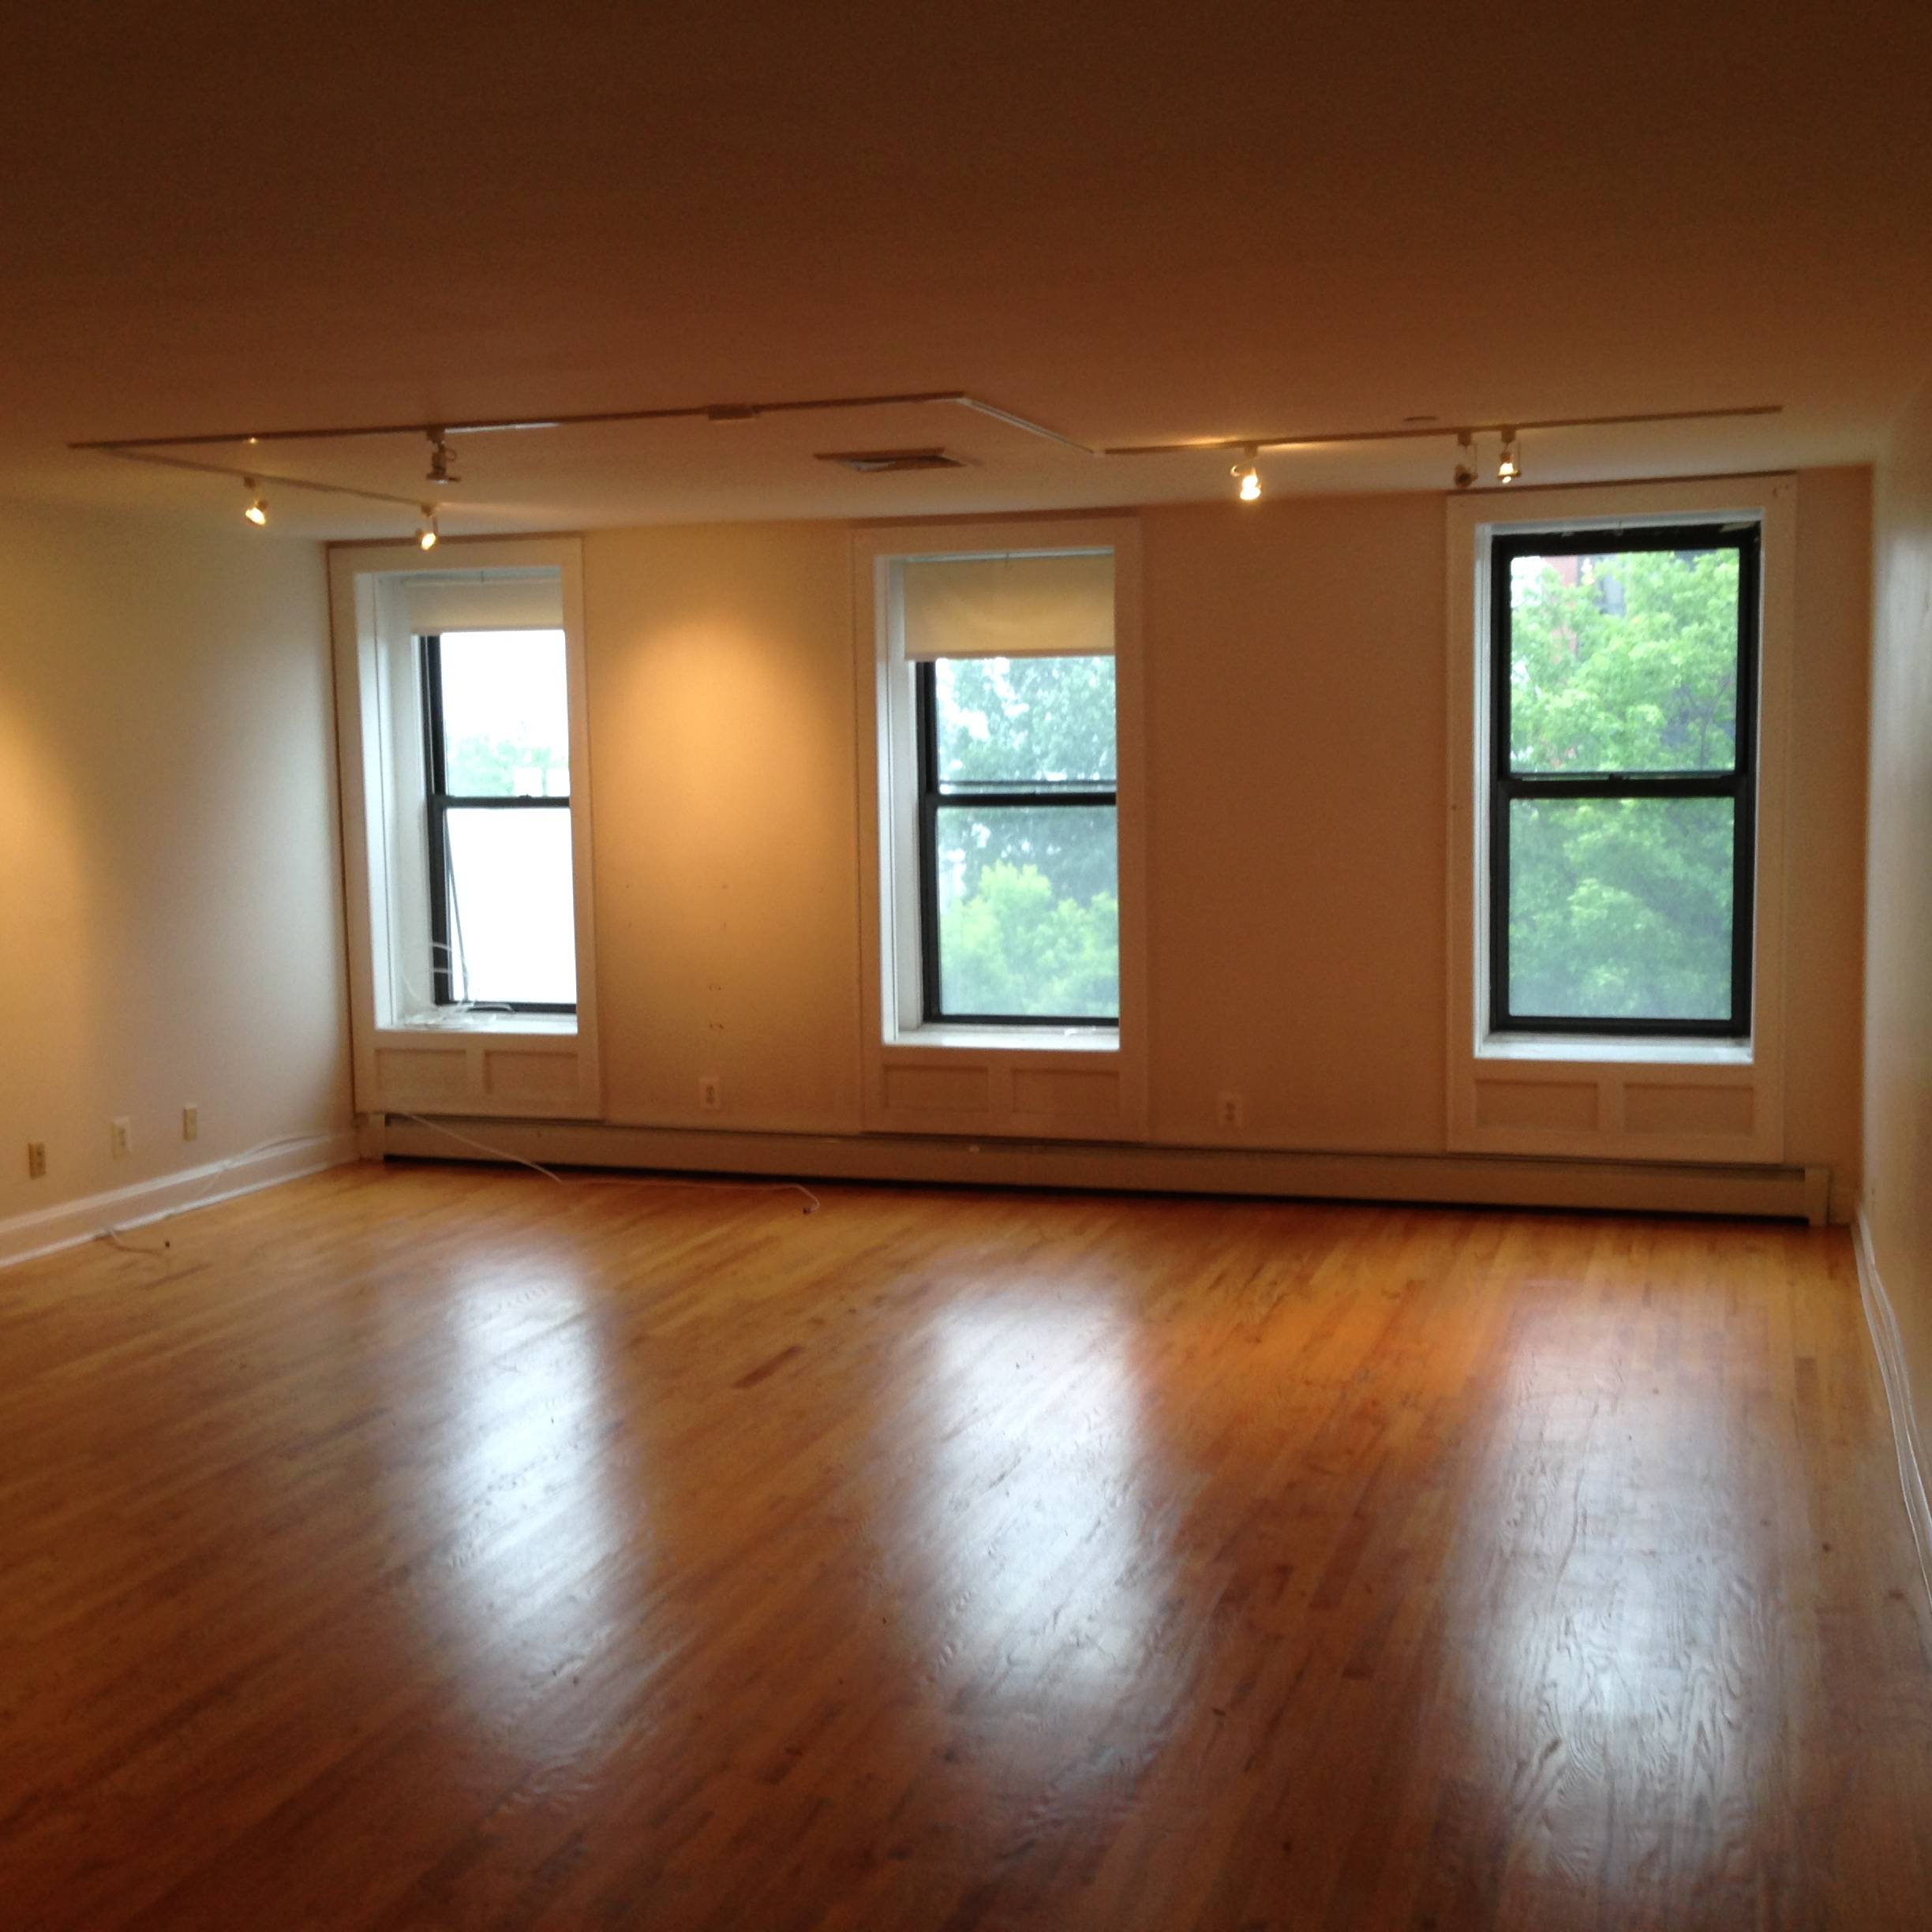 Newly Renovated 1,135 sq ft 1 Bed / convertible 2 in Park Slope, Brooklyn. Abundant Daylight with Views of Manhattan. Only Blocks from Prospect Park.